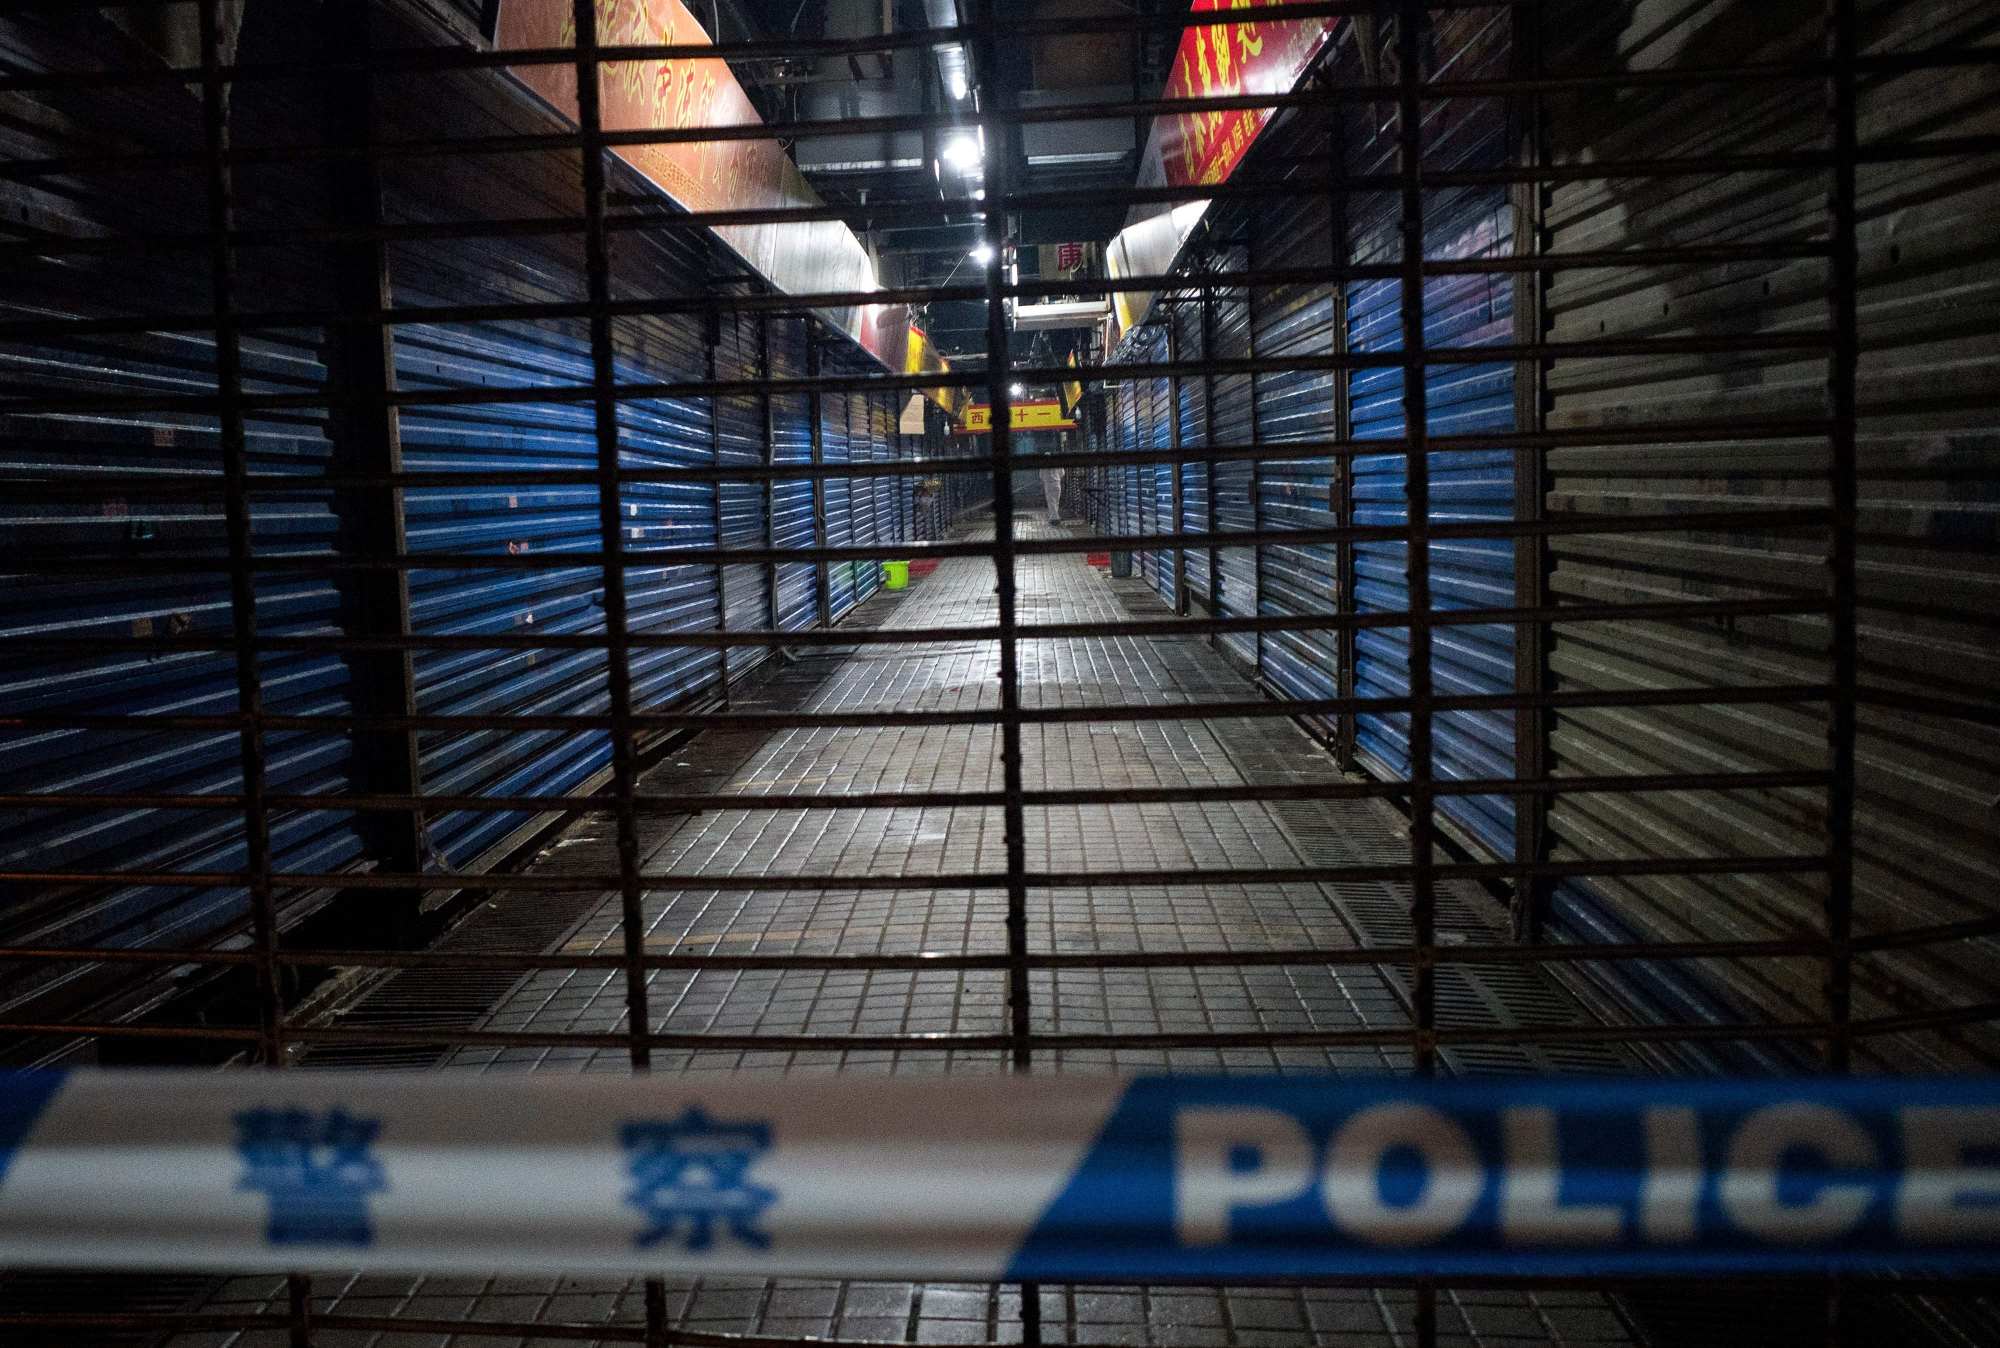 Wuhan Hygiene Emergency Response Team members search the closed Huanan Seafood Wholesale Market in Wuhan in January 2020. Photo: AFP